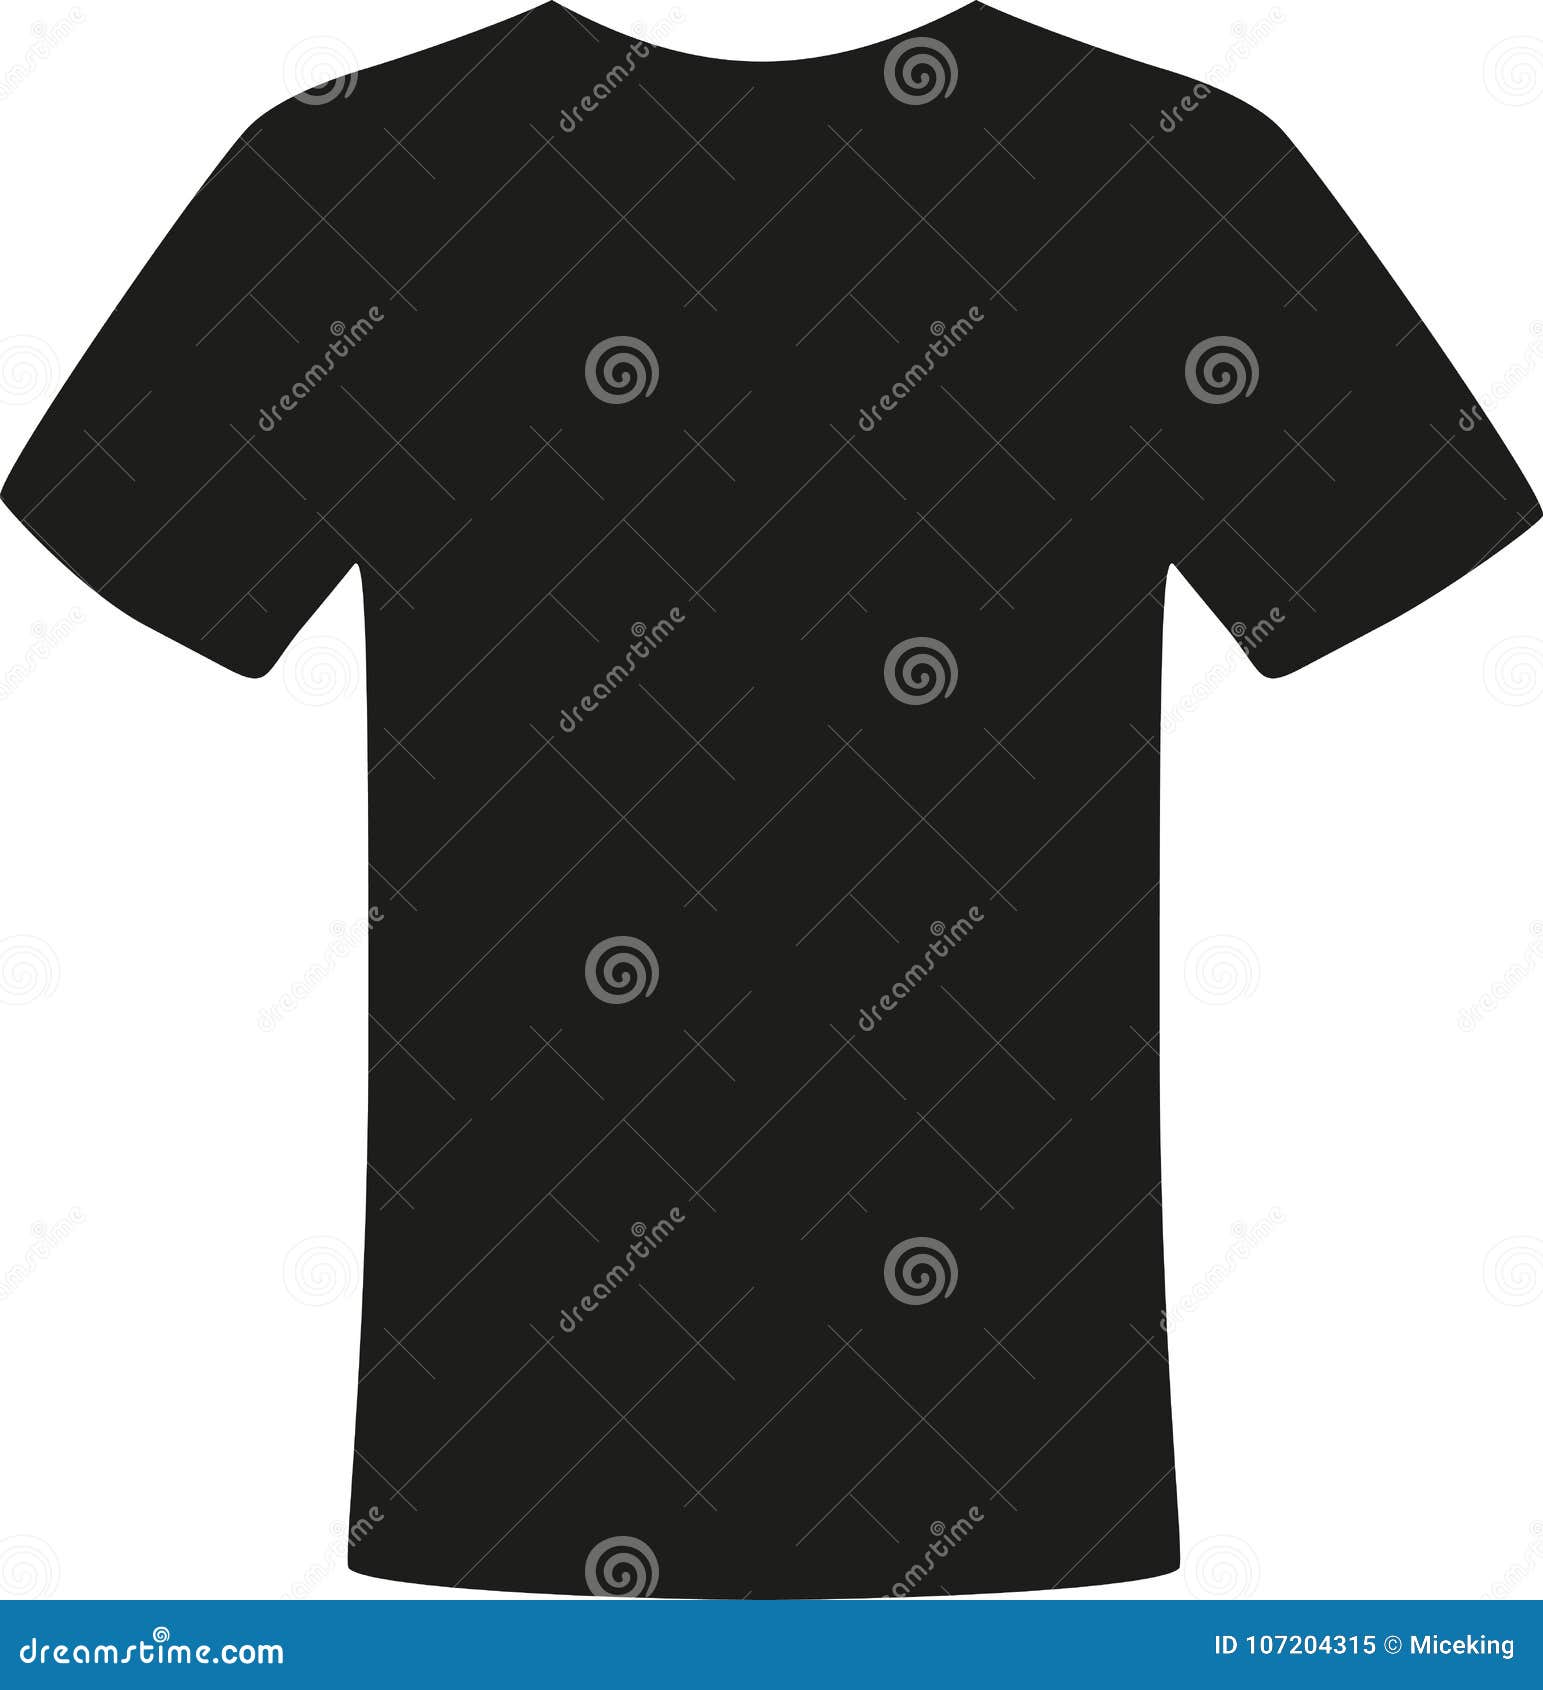 Black T-Shirt clothes stock vector. Illustration of pictogram - 107204315